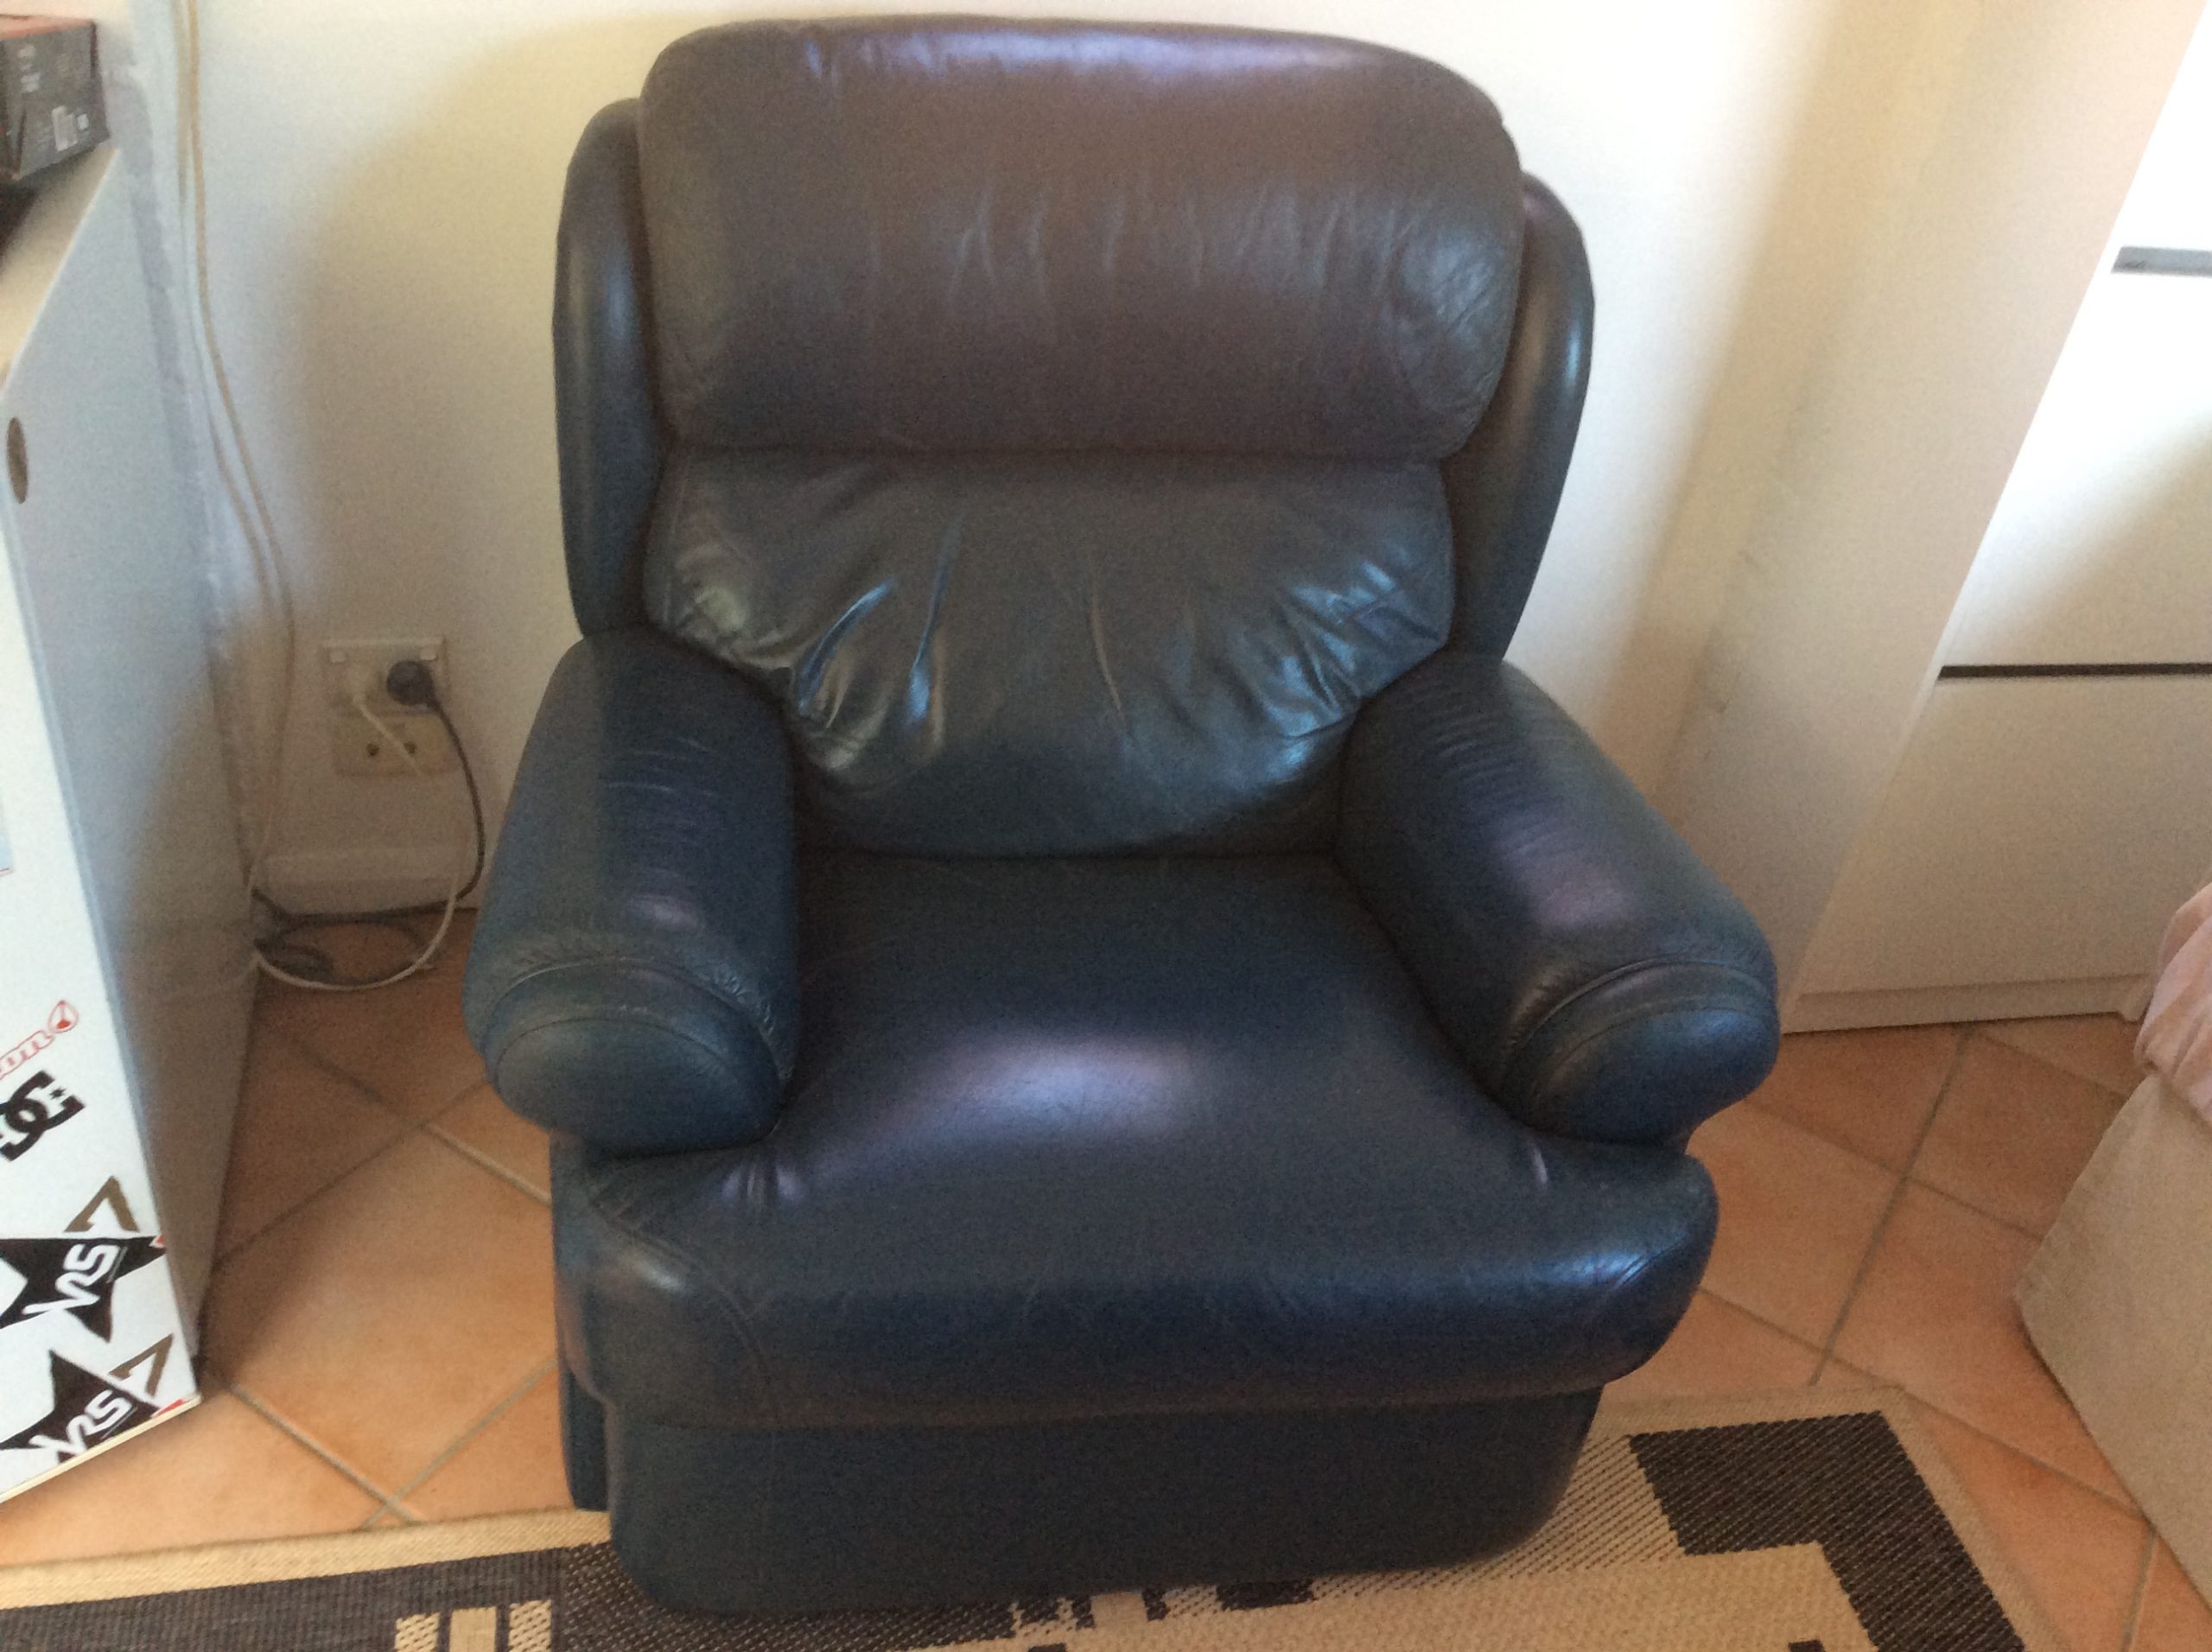 Leather sofa and arm chair